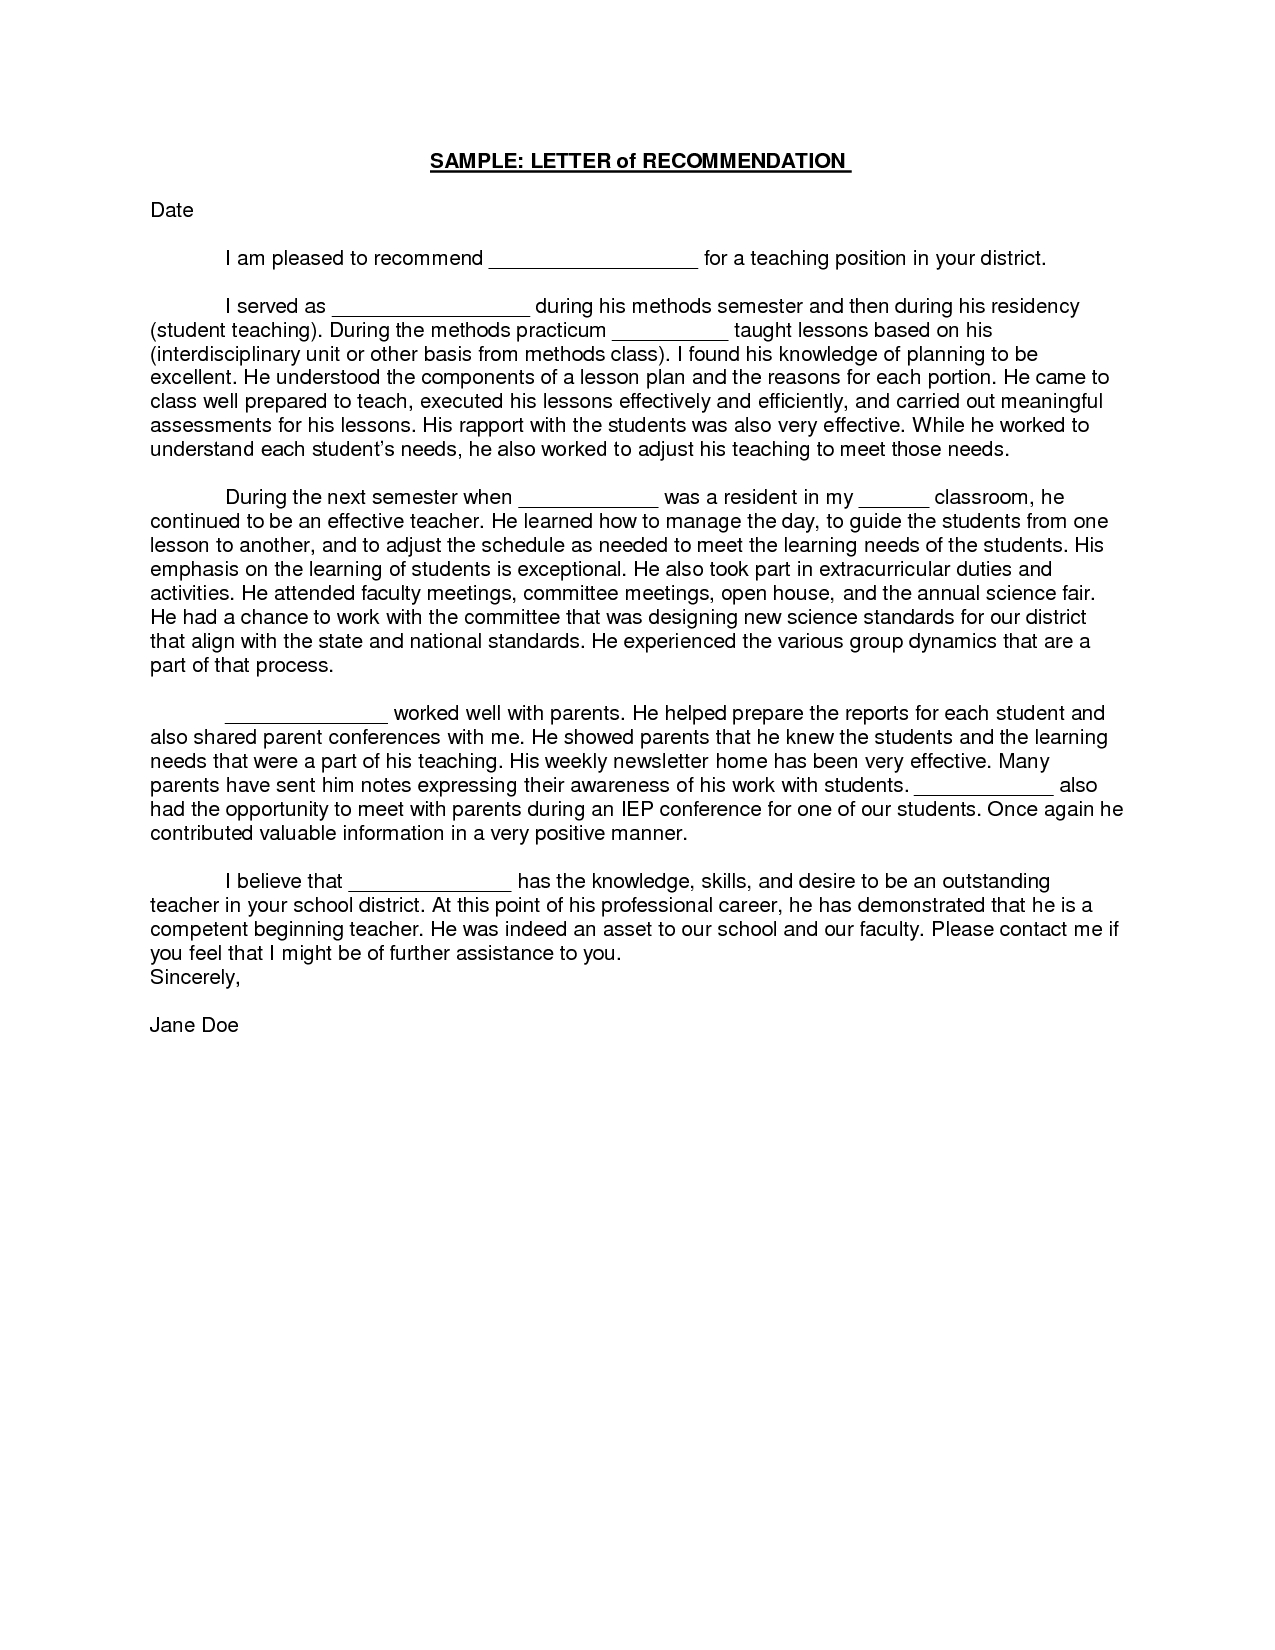 Sample Recommendation Letter For Teaching Faculty Position in dimensions 1275 X 1650